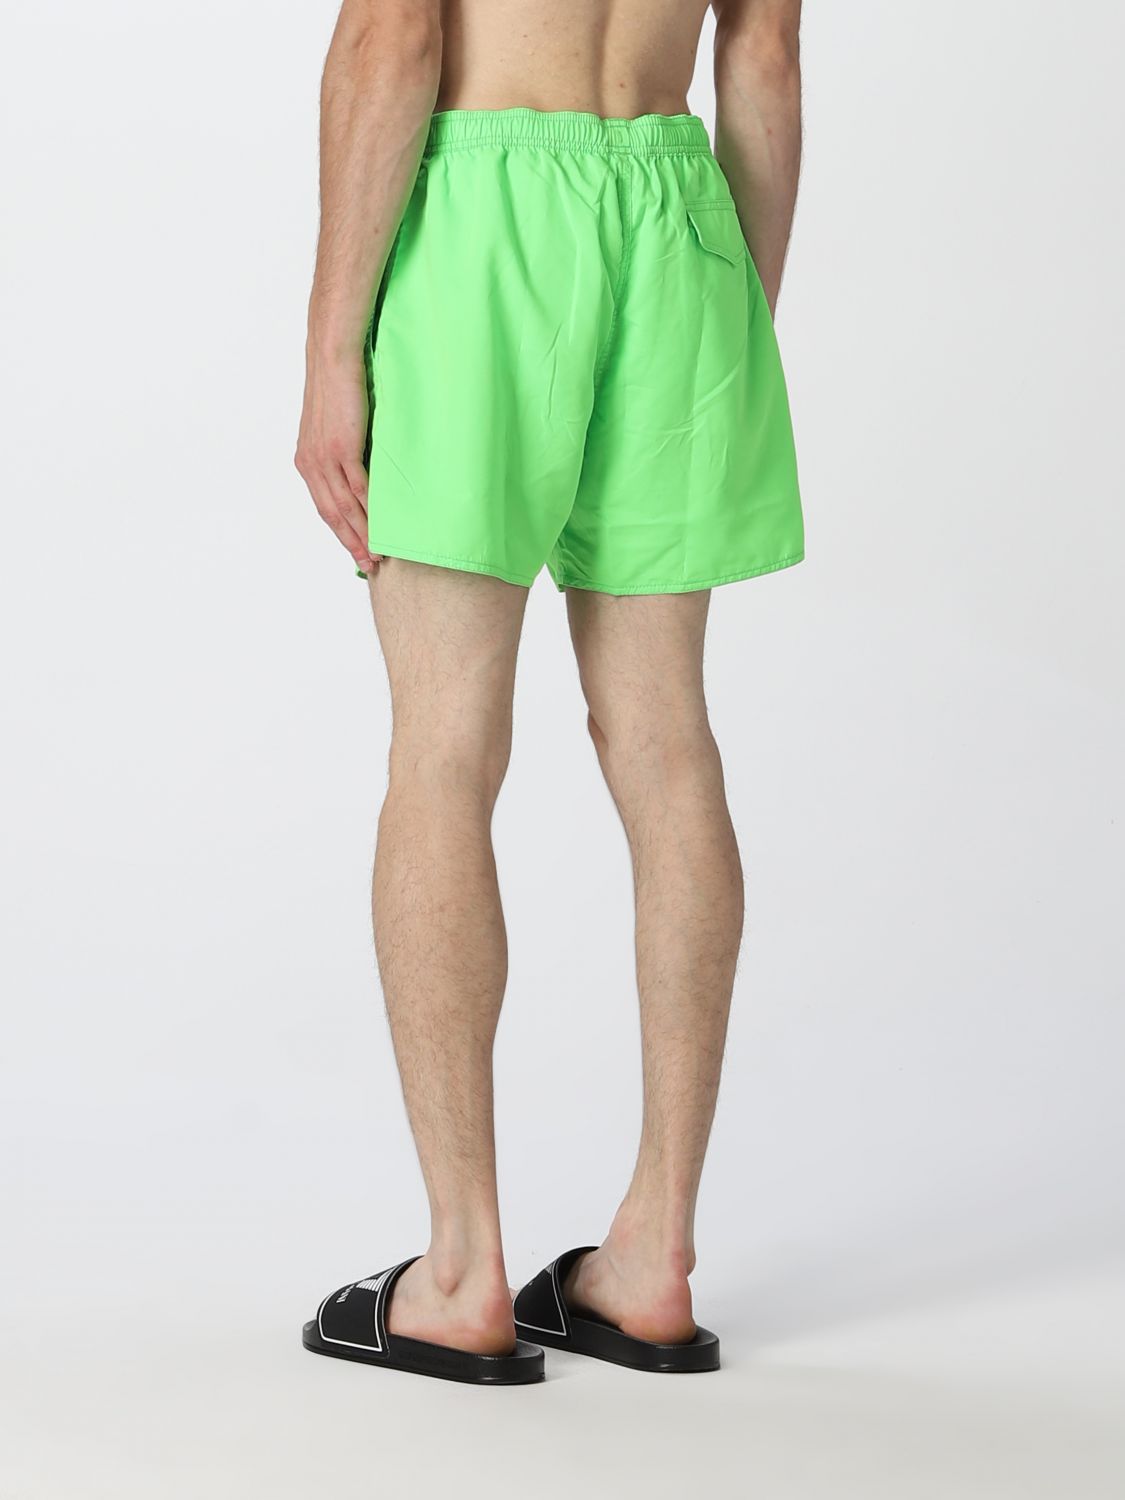 Ea7 Outlet: swimsuit for man - Green | Ea7 swimsuit 9020002R734 online ...